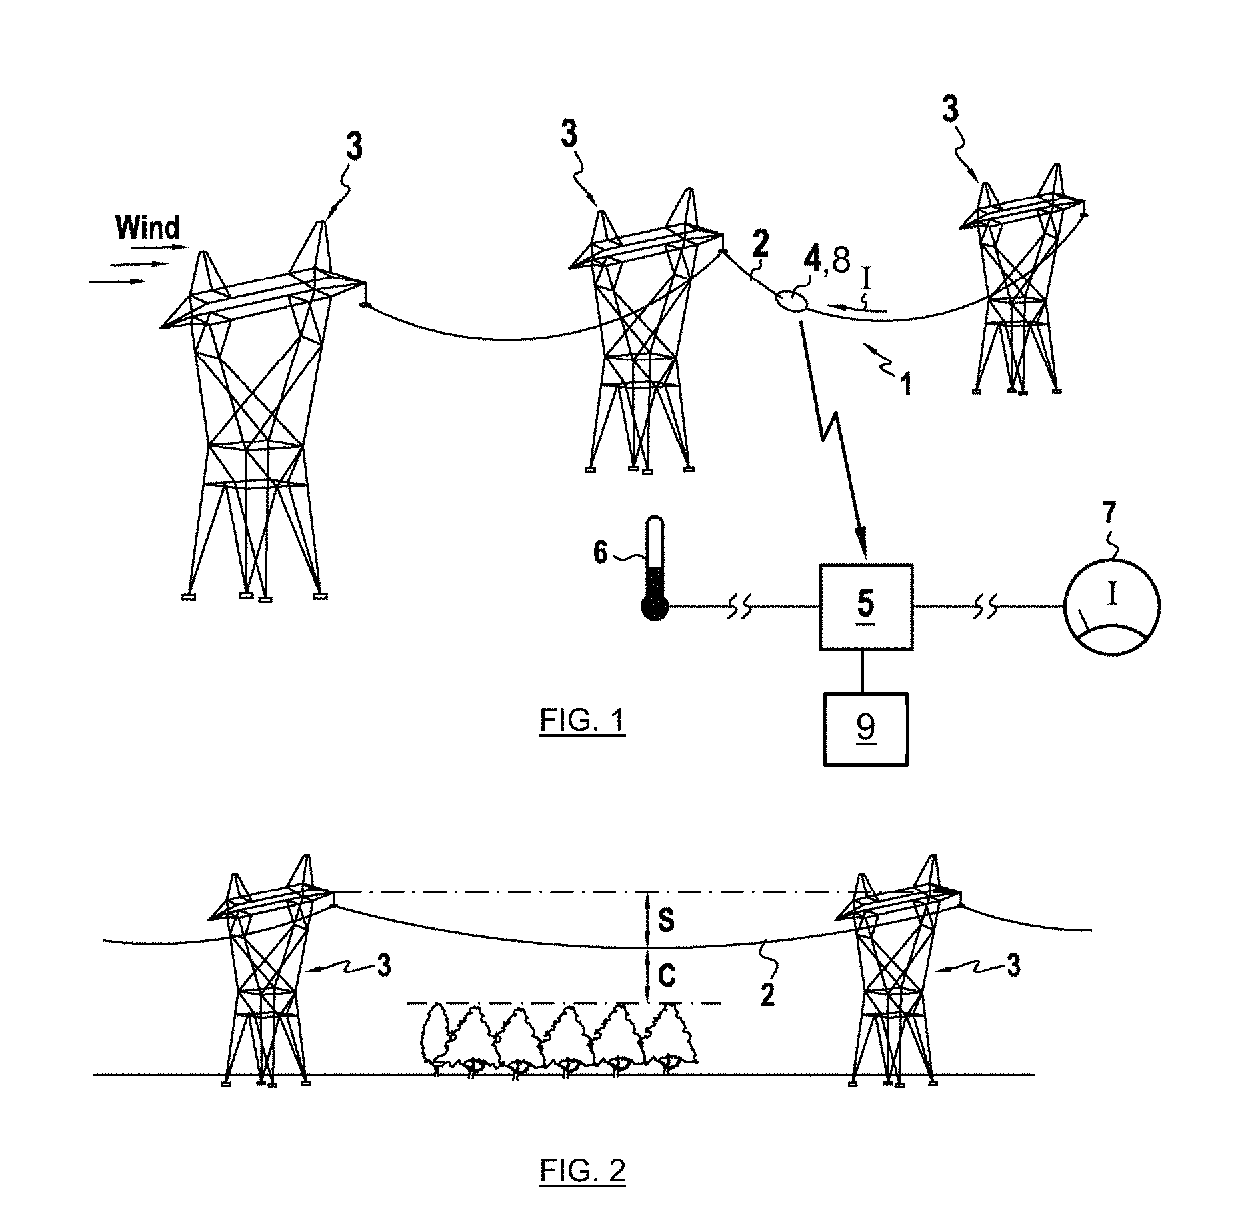 Method and system for measuring/detecting ice or snow atmospheric accretion on overhead power lines